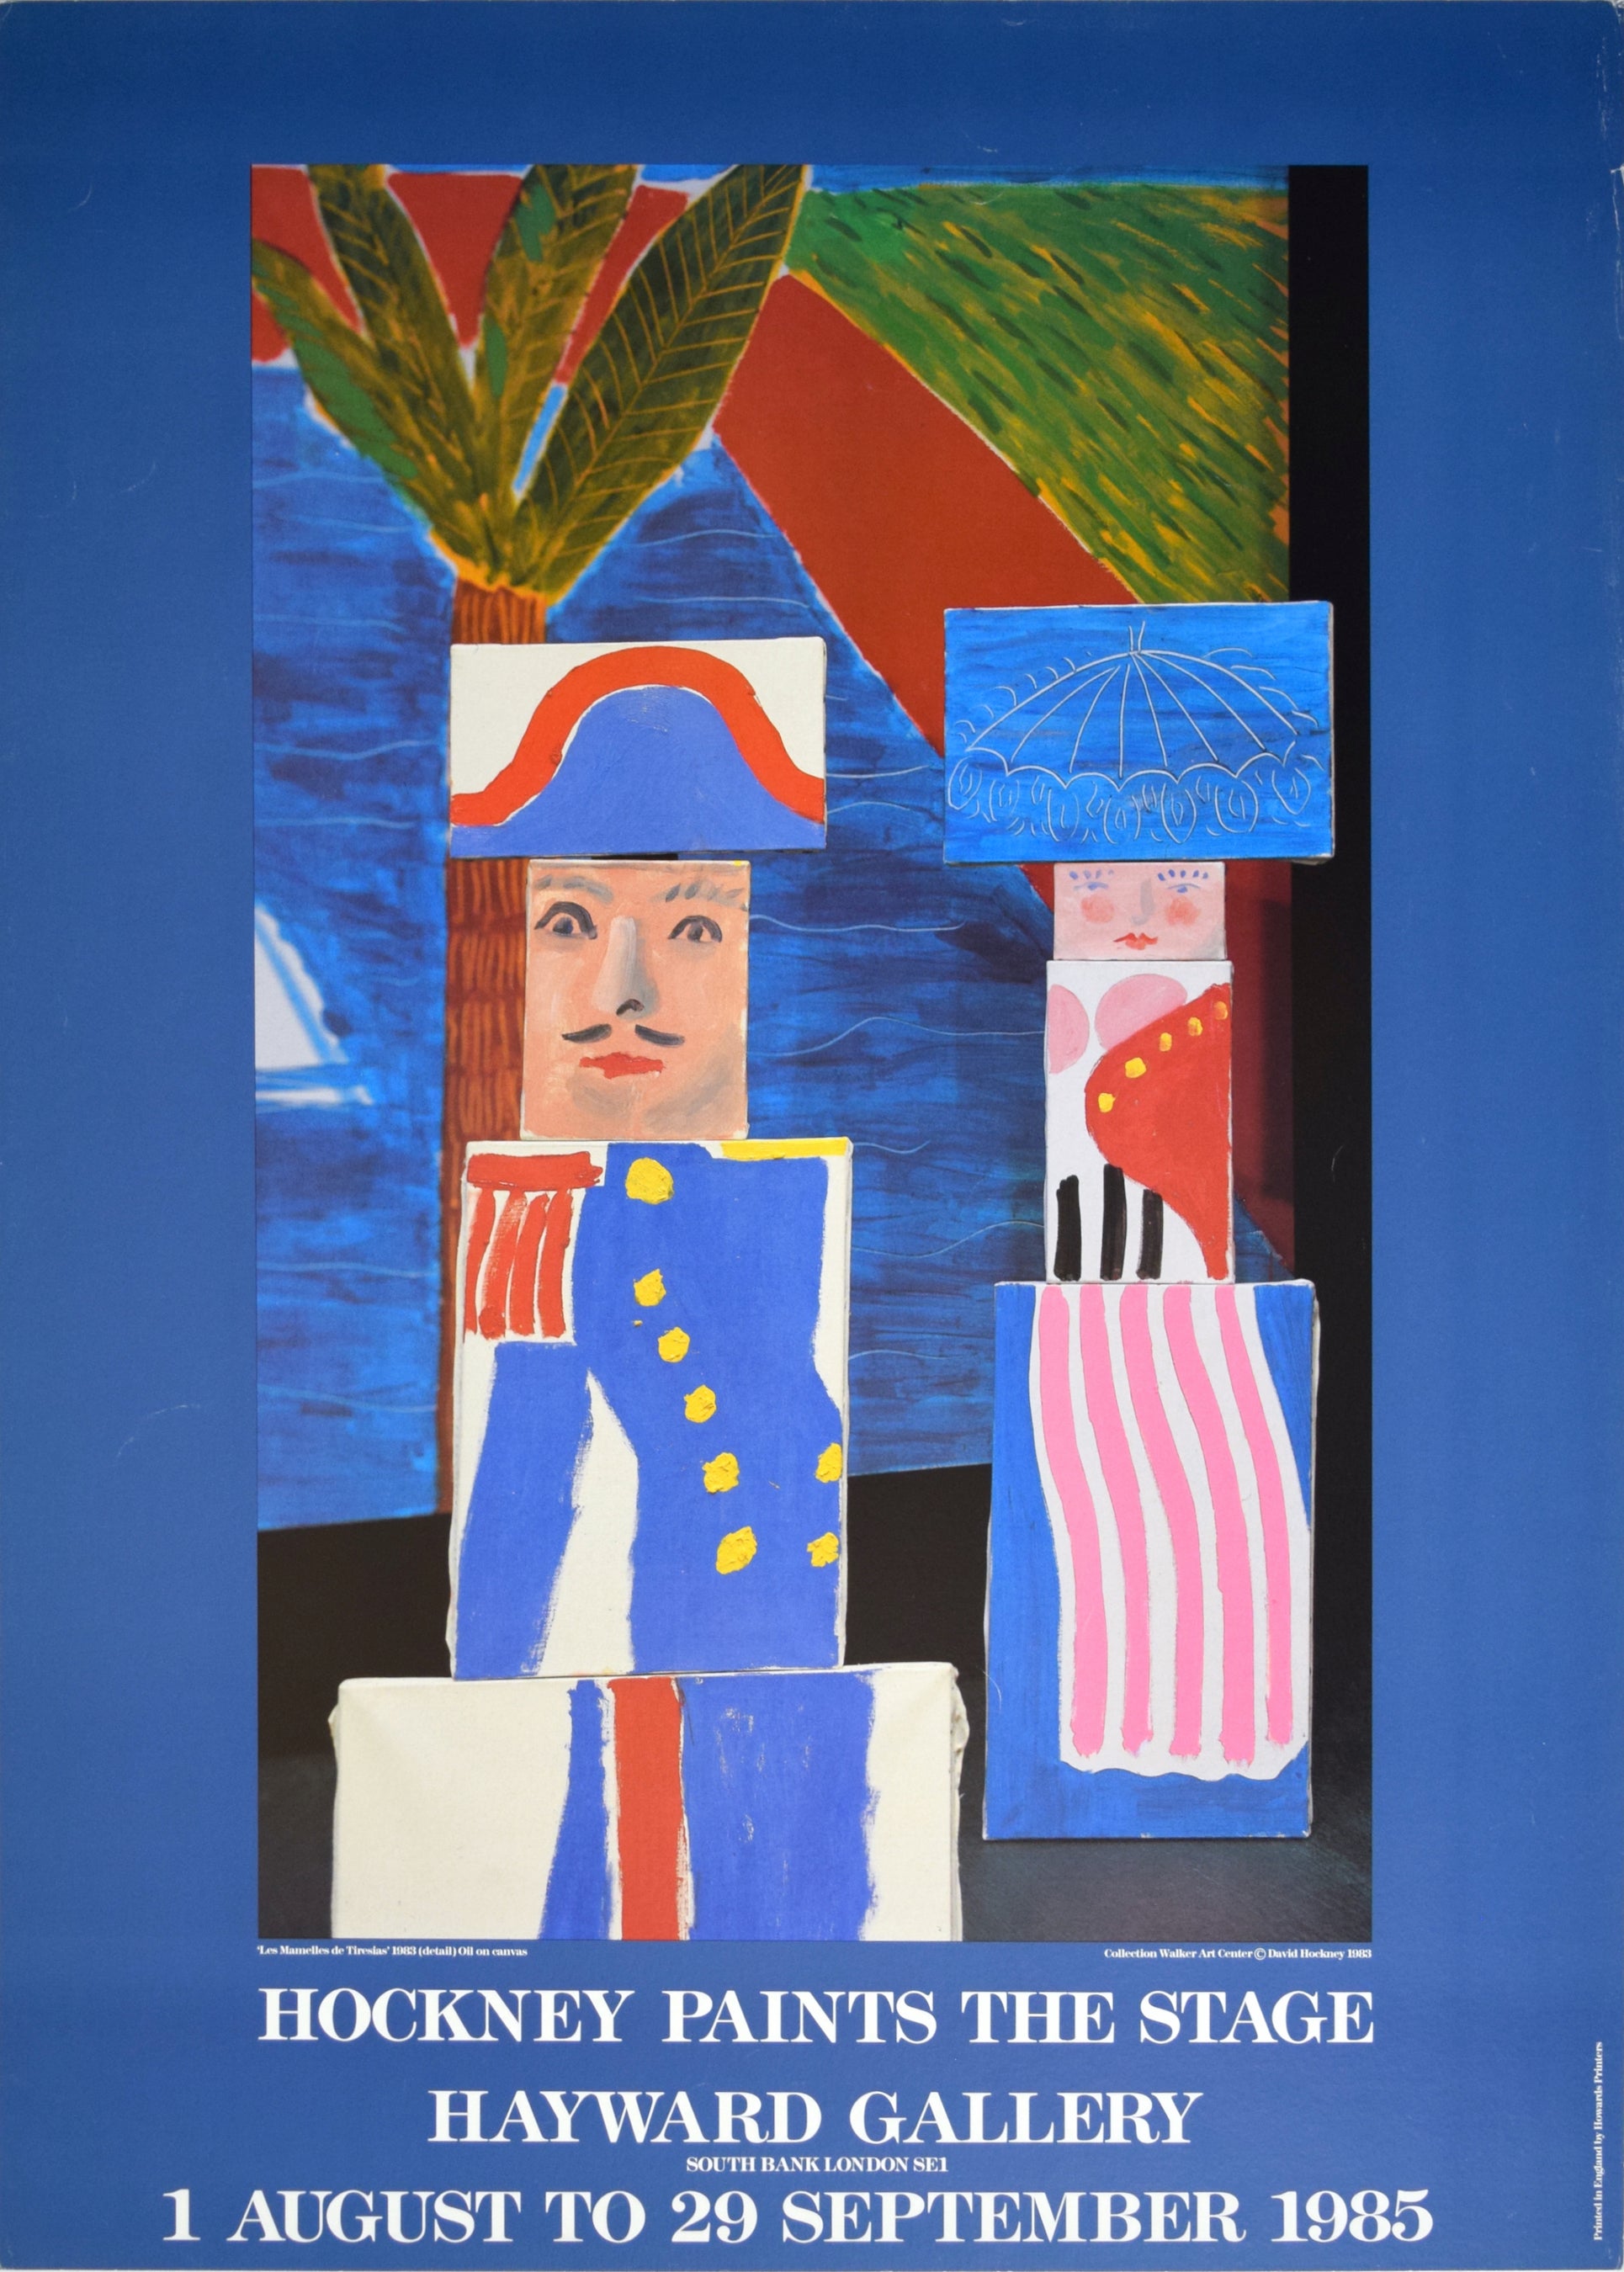 1985 David Hockney Paints the Stage Poster, Hayward Gallery